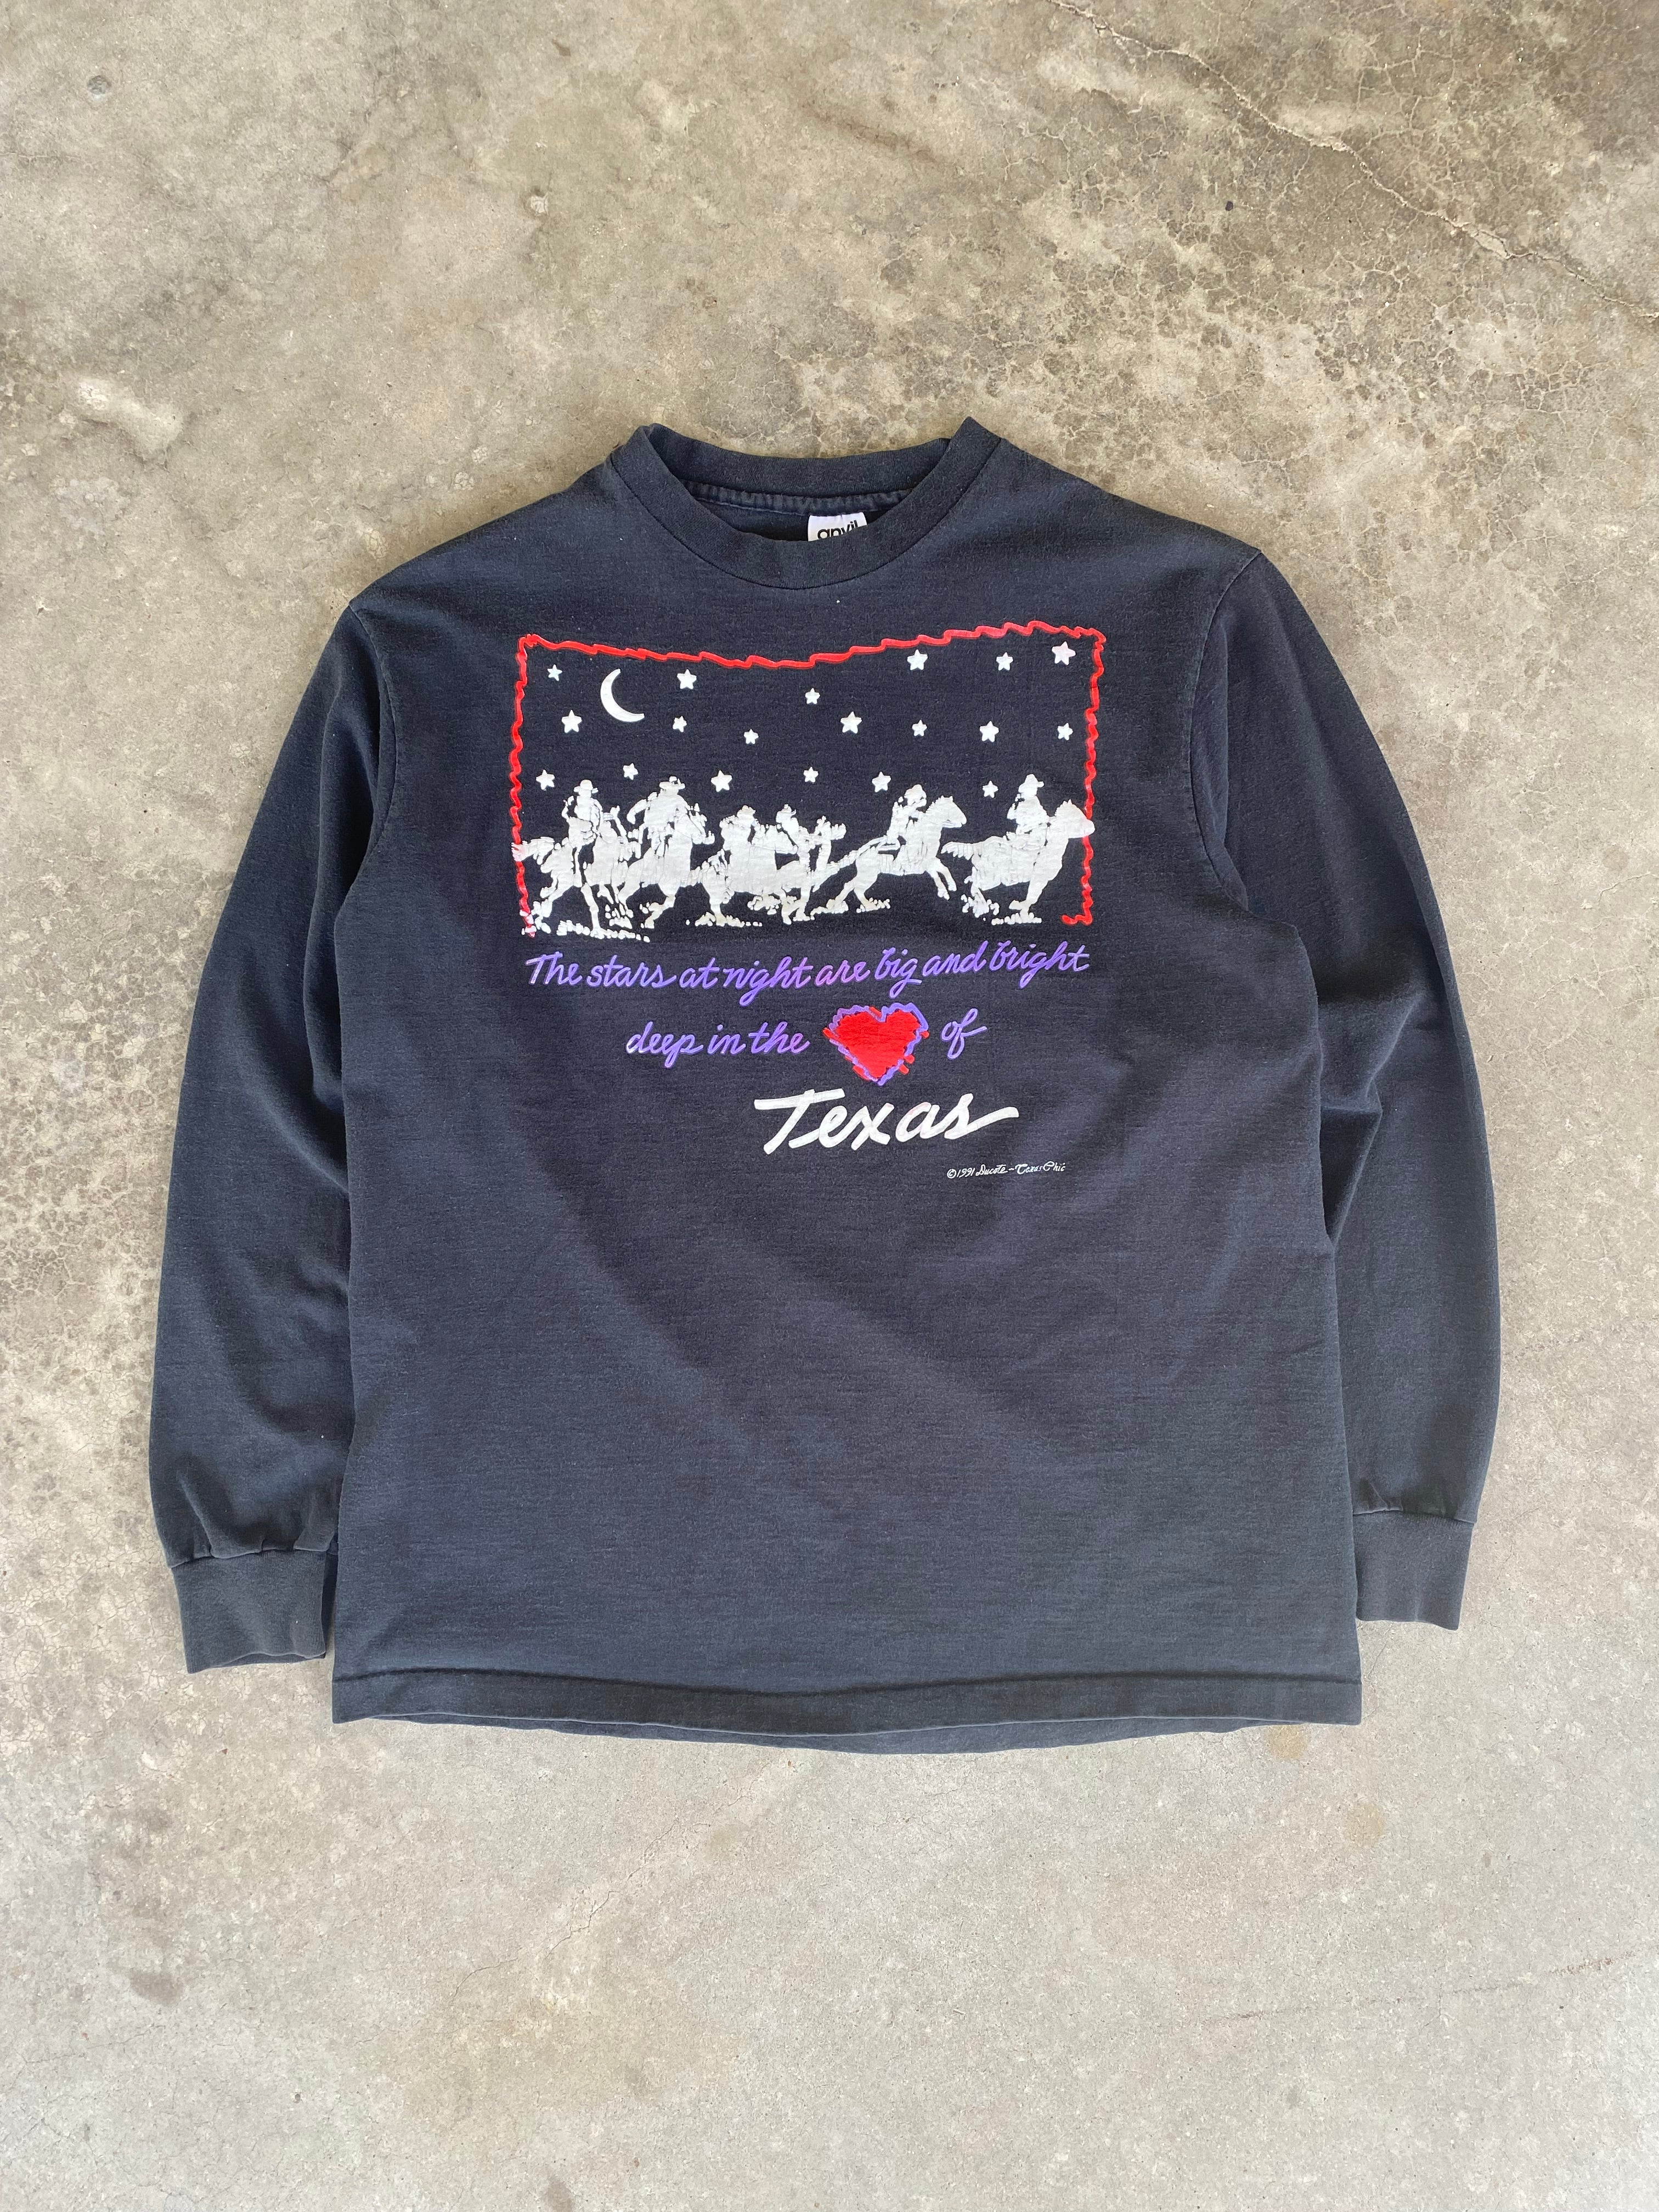 1991 "The Stars at night.. Deep in the Heart of Texas" Longsleeve (L/XL)